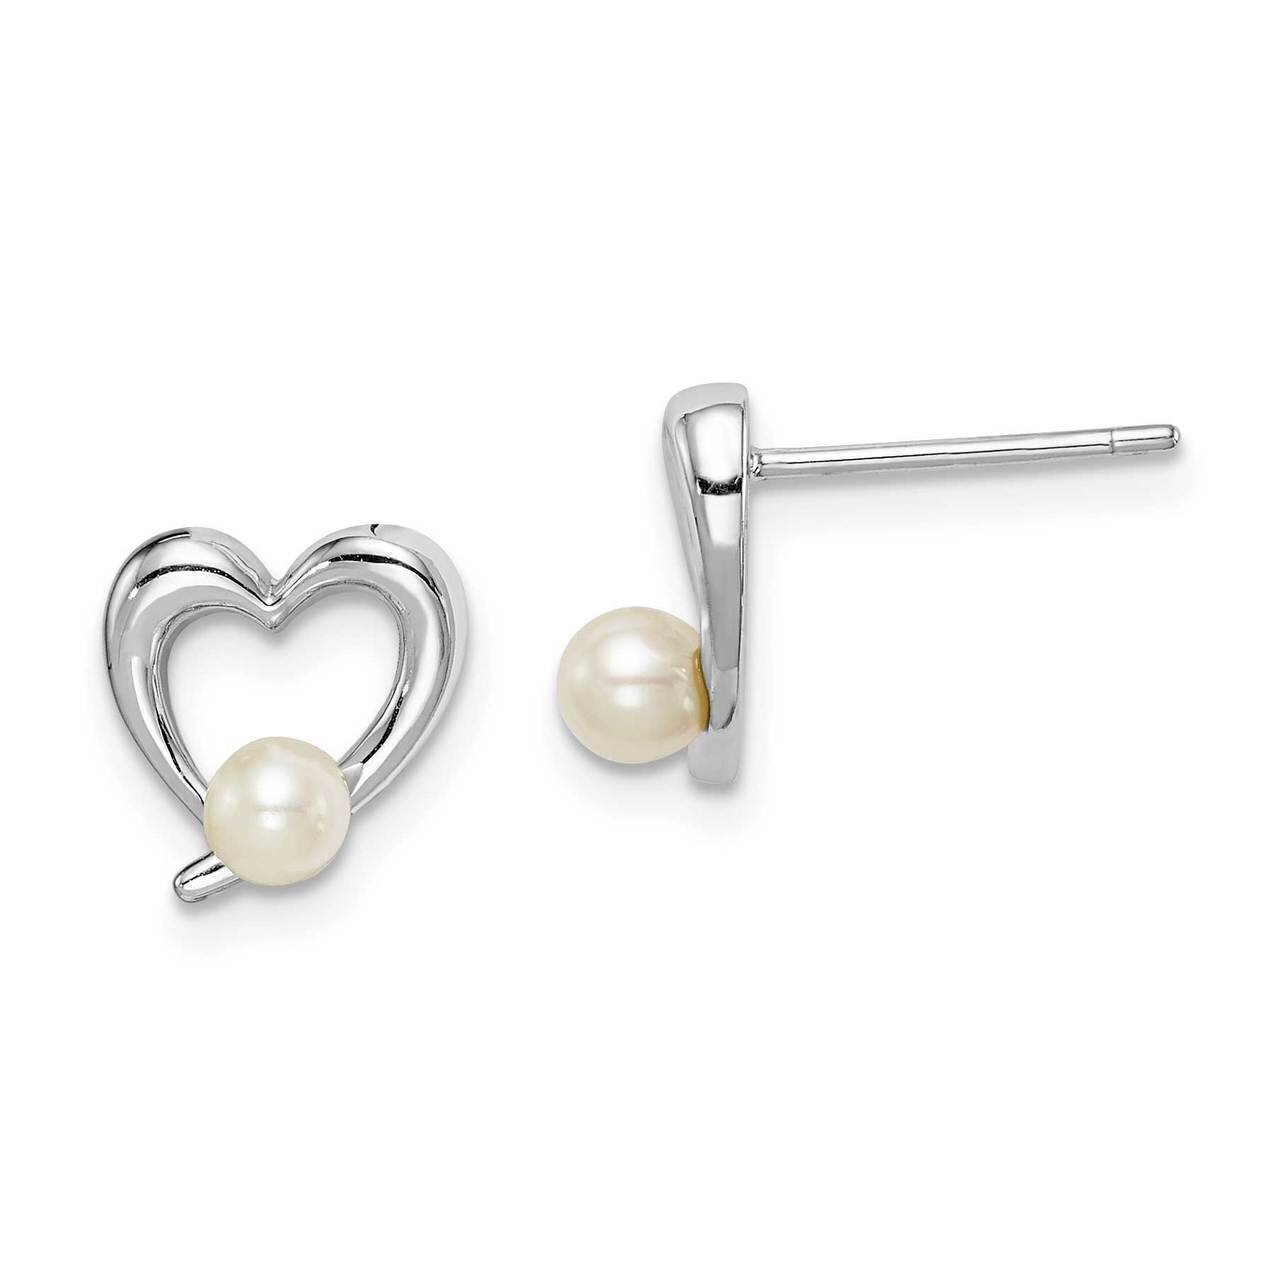 3-4mm White Round Freshwater Cultured Pearl Heart Earrings Sterling Silver Rhodium Plated QE15308